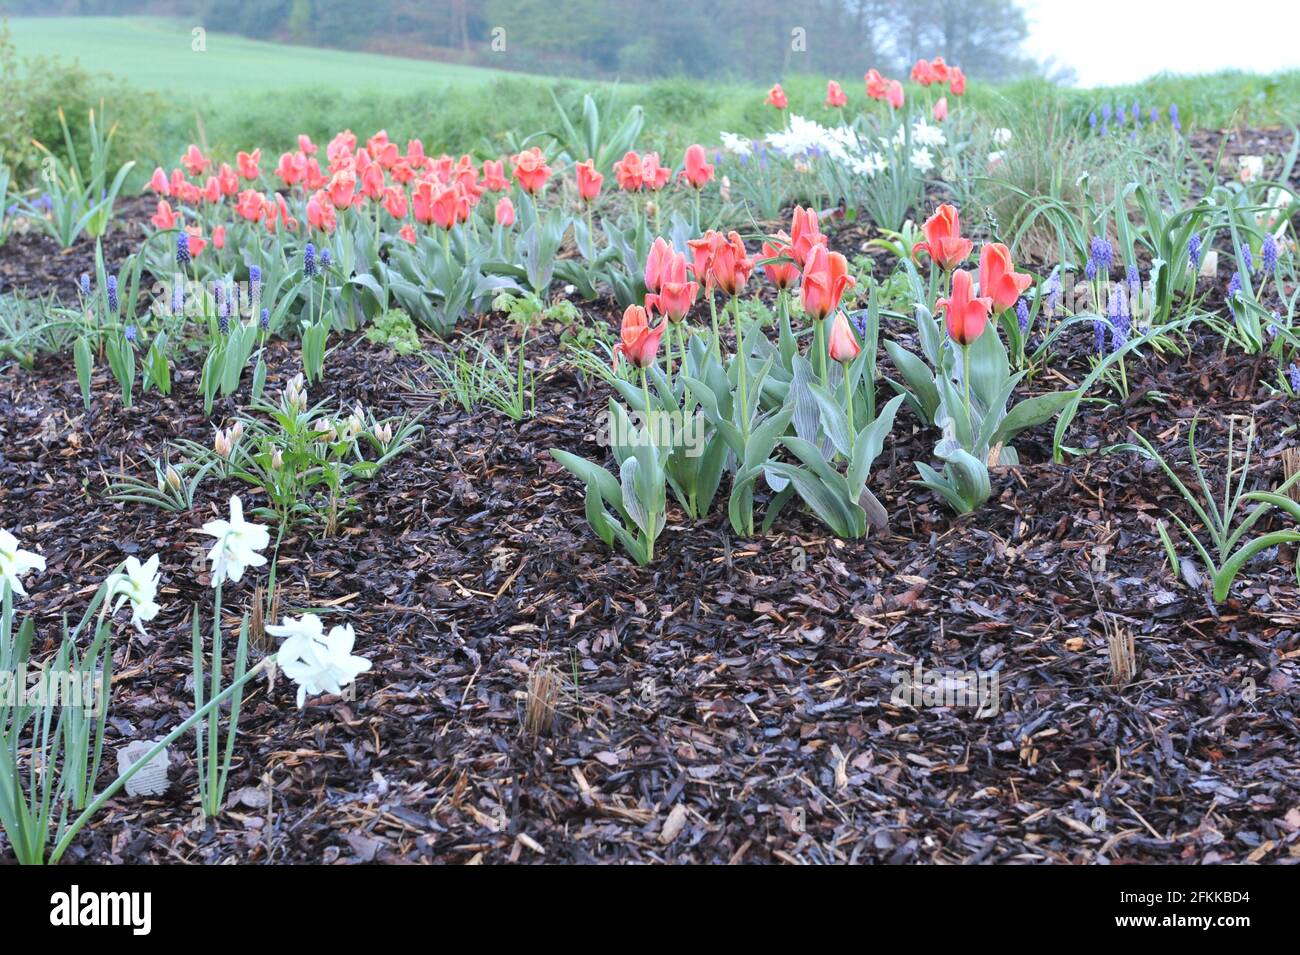 Orange-red Greigii tulips (tulipa) Calypso with striped leaves bloom in a garden in April Stock Photo